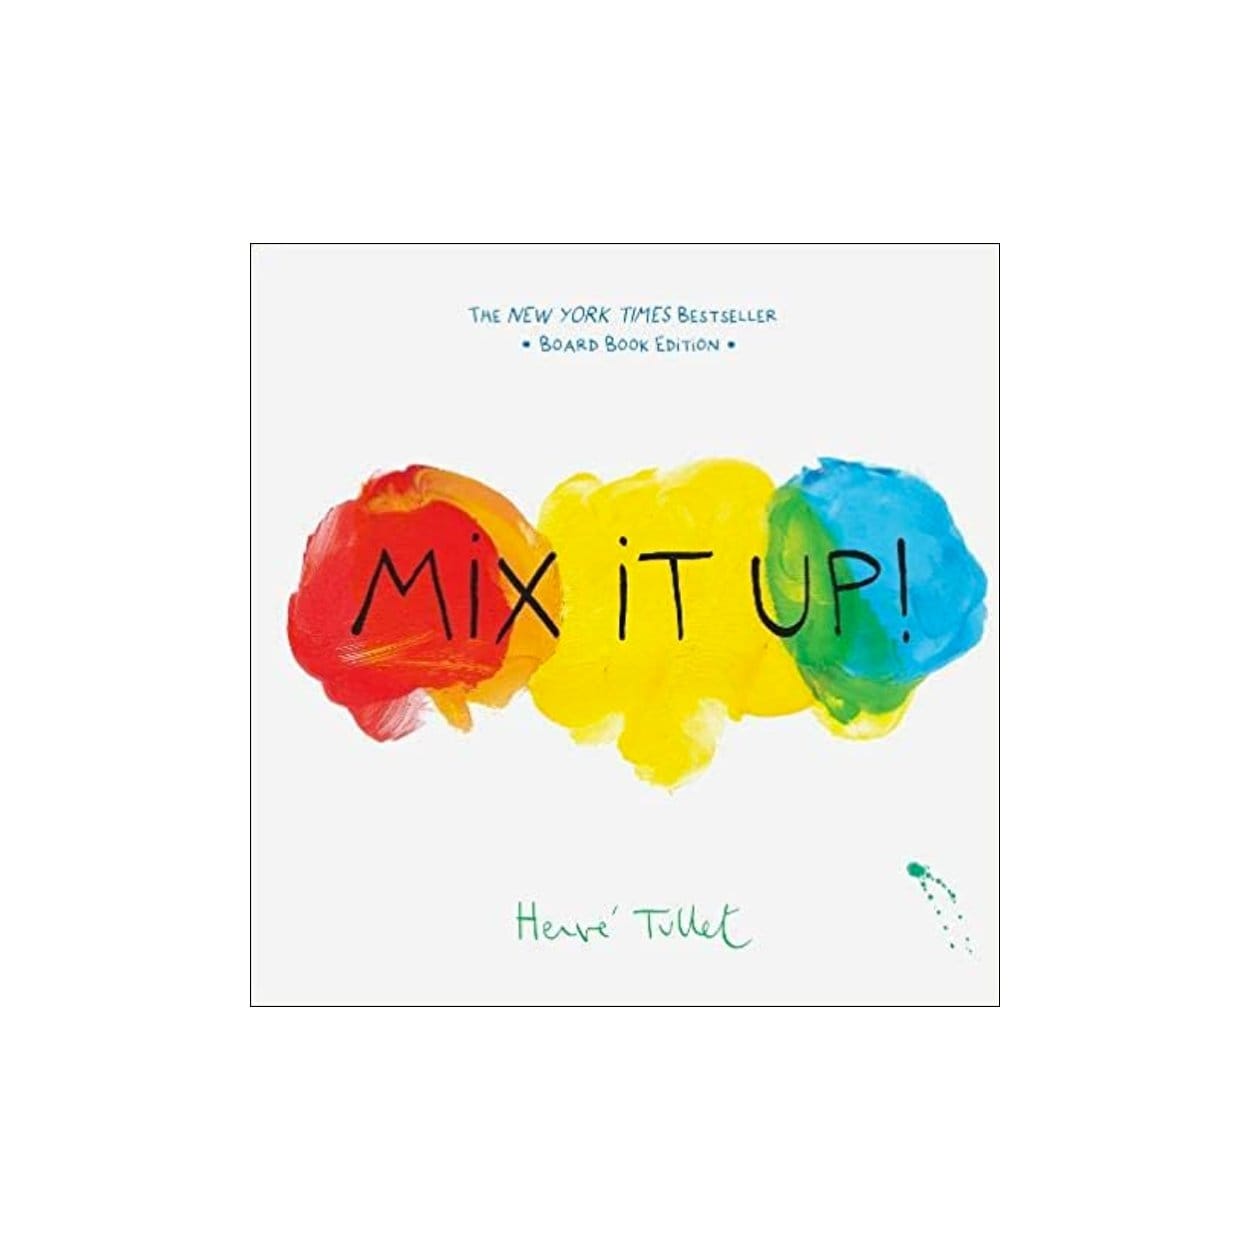 Mix It Up - The Montessori Room, Toronto, Ontario, Canada, Herve Tullet, interactive books for kids, best books for kids, books about colour, bestselling children's books, children's books, board books, New York Times bestseller